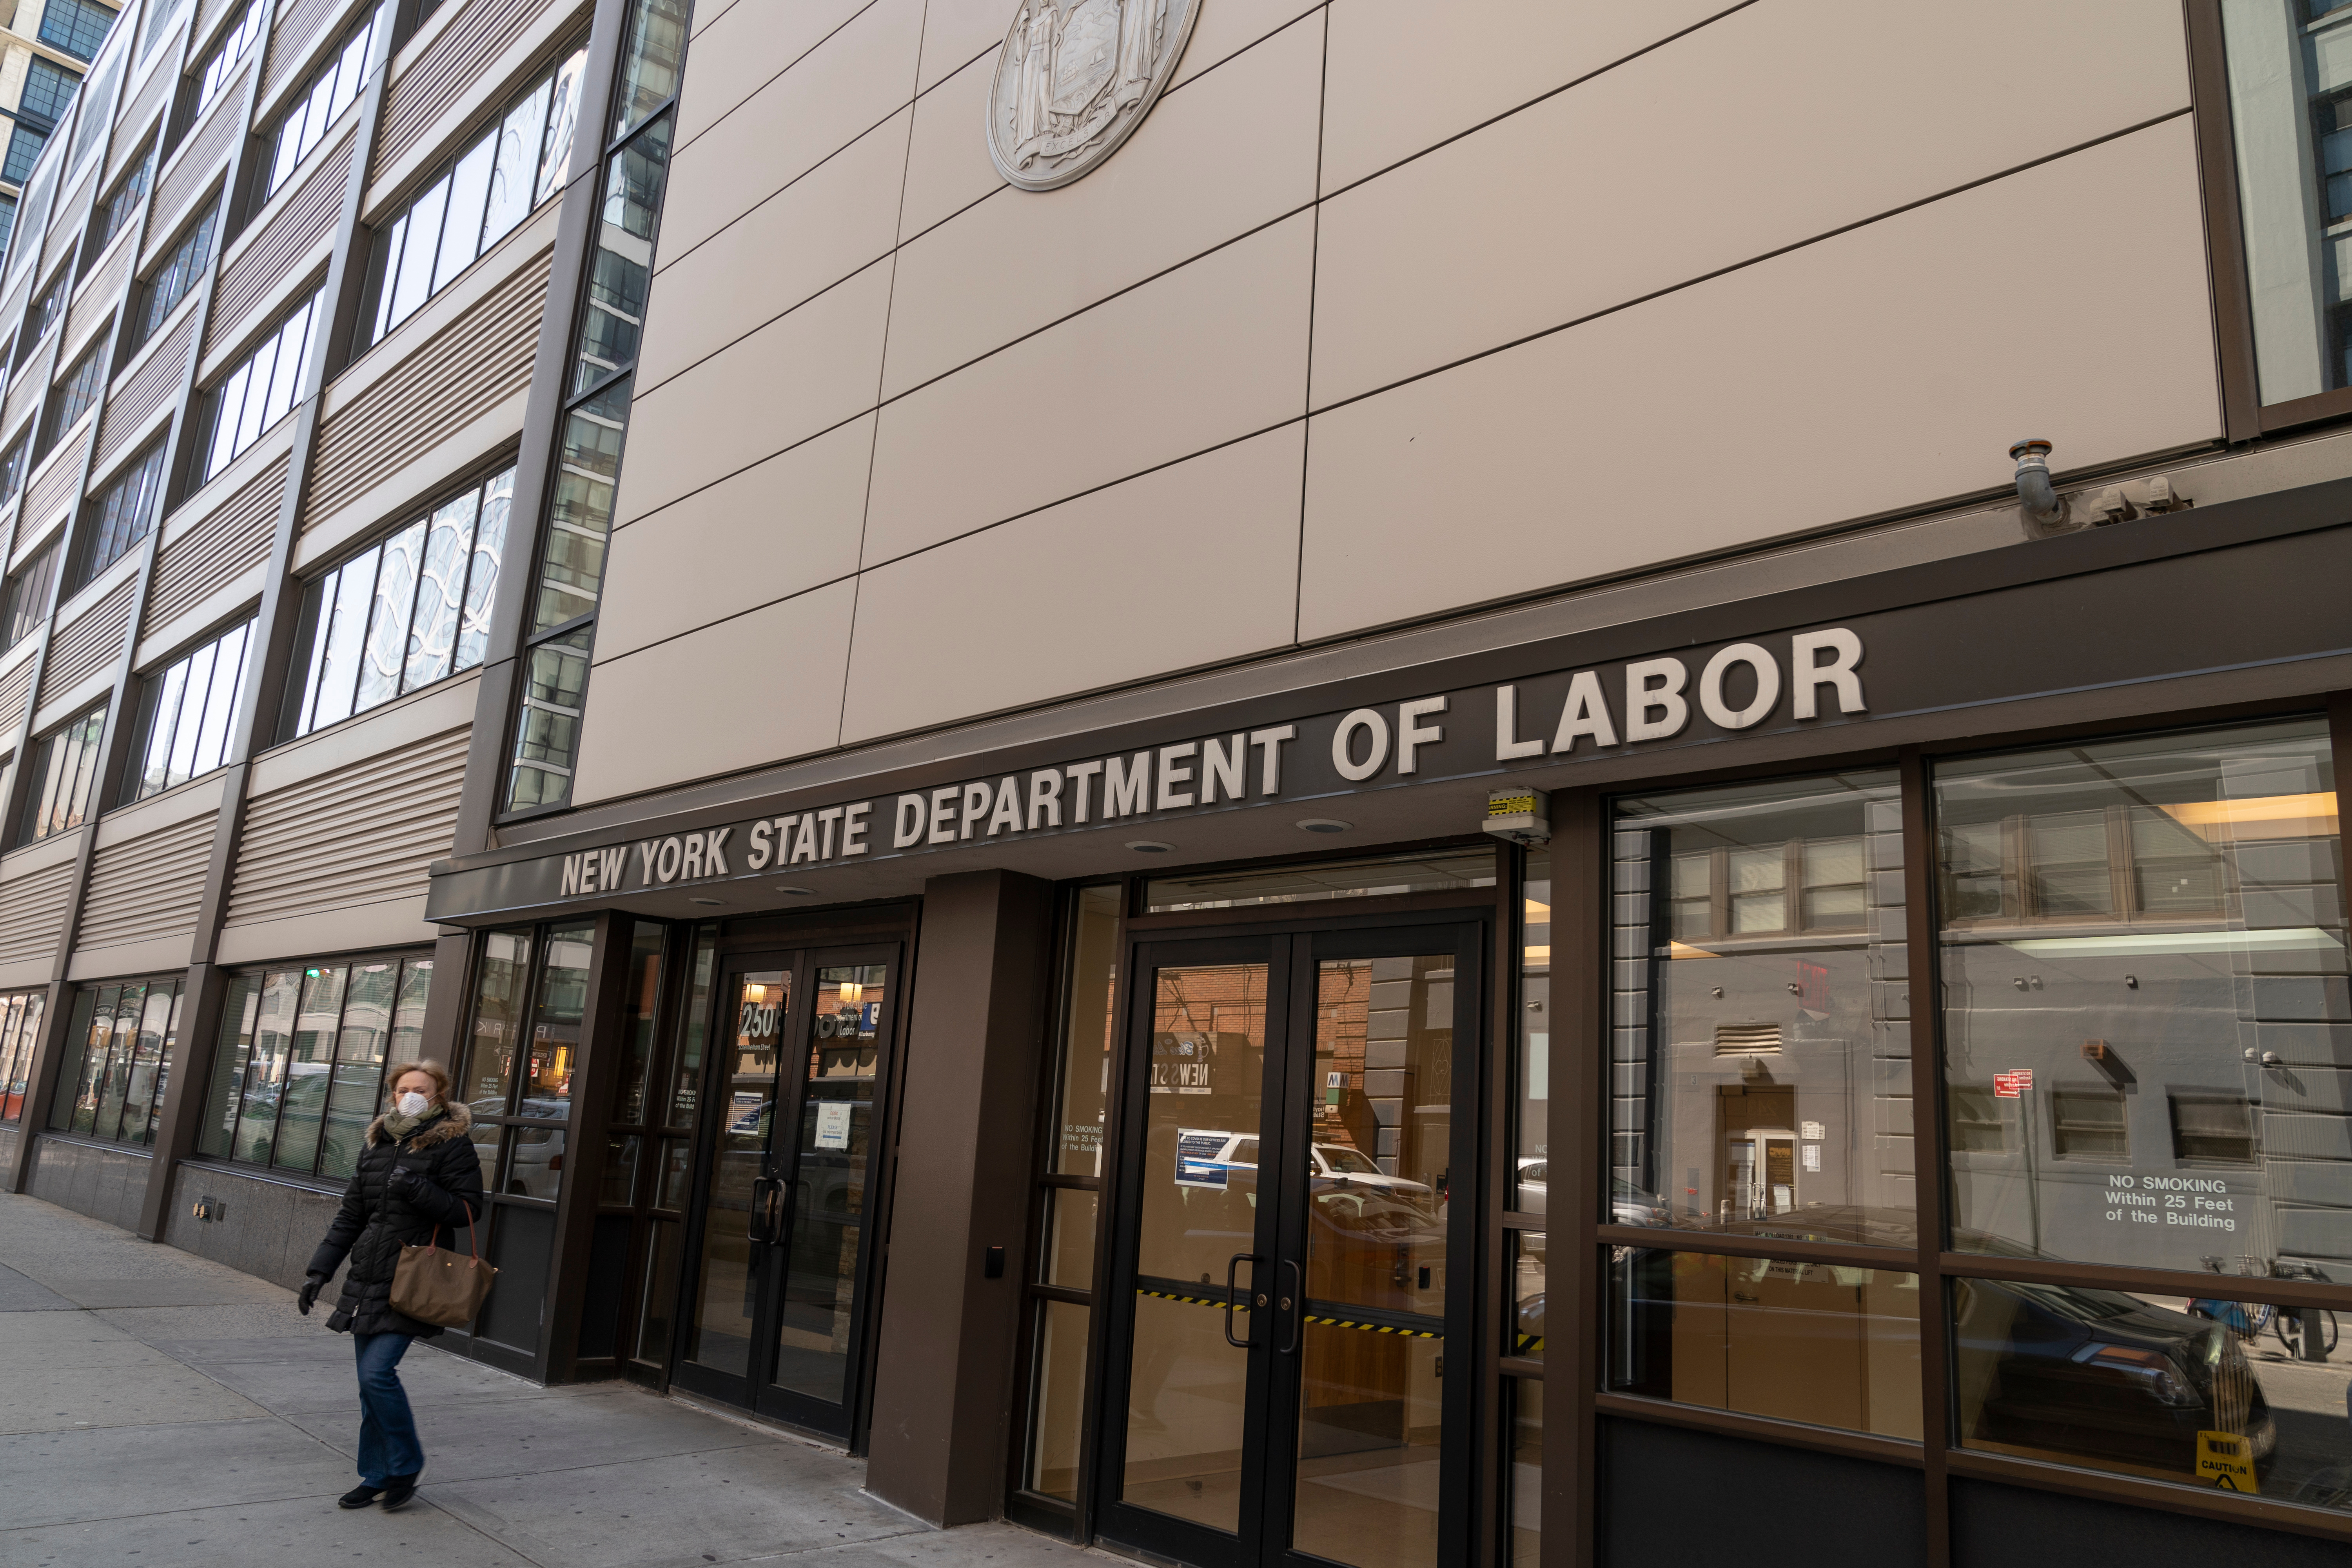 NY comptroller: Taxpayers likely lost $11 billion in
fraudulent unemployment claims